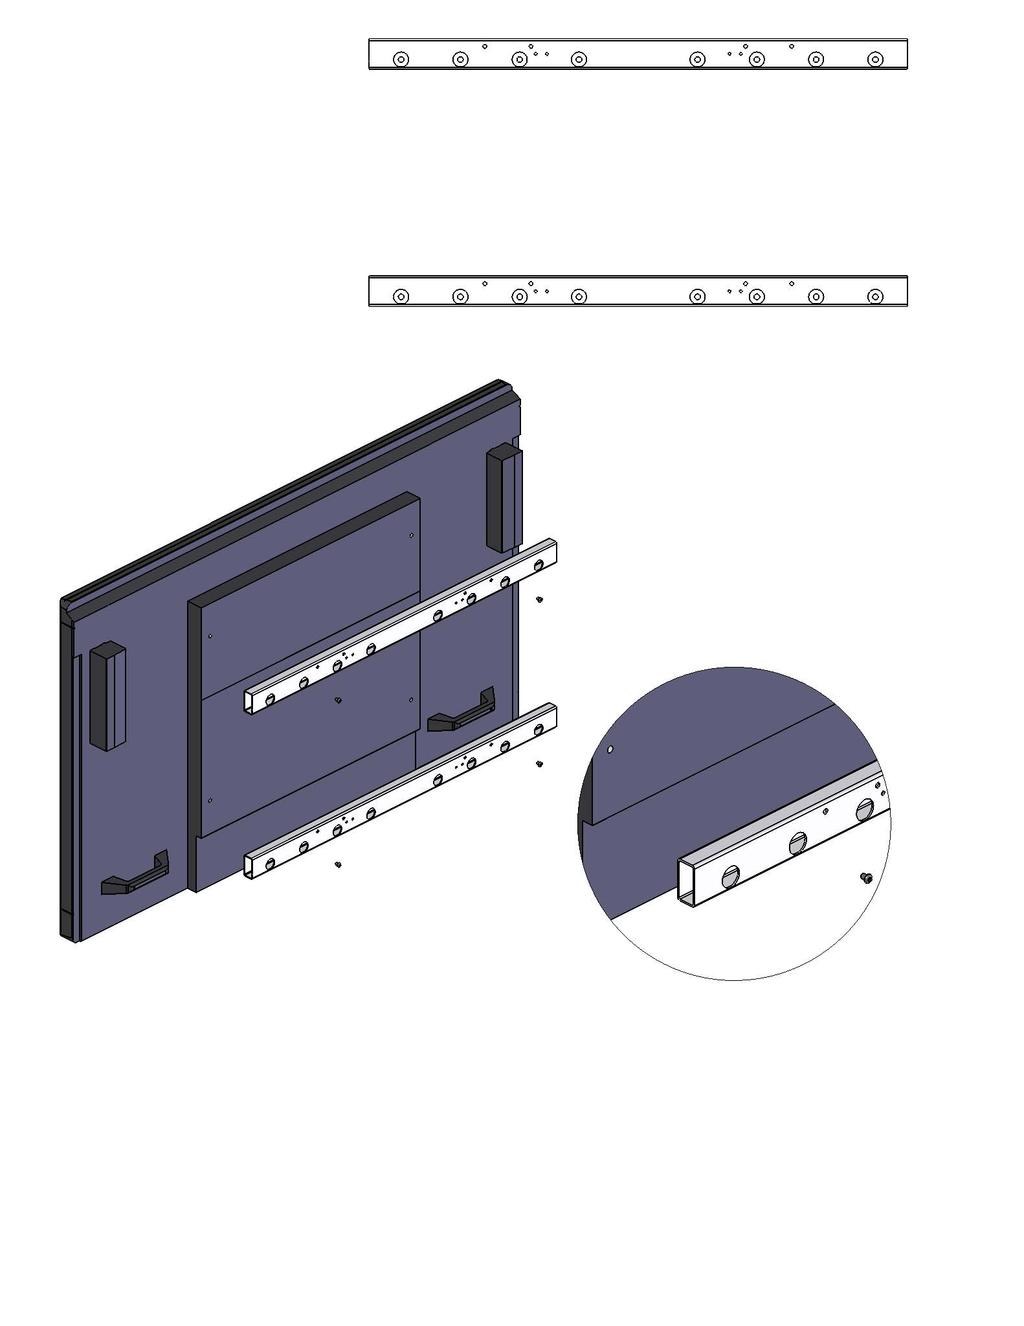 800 VESA 600 VESA 400 VESA 200 VESA 200 VESA 400 VESA 600 VESA 800 VESA 5 Please use the appropriate mounting holes for your LCD (not included) as shown above G5-ACC-PT5 G5-ACC-PT5 LCD fastener from